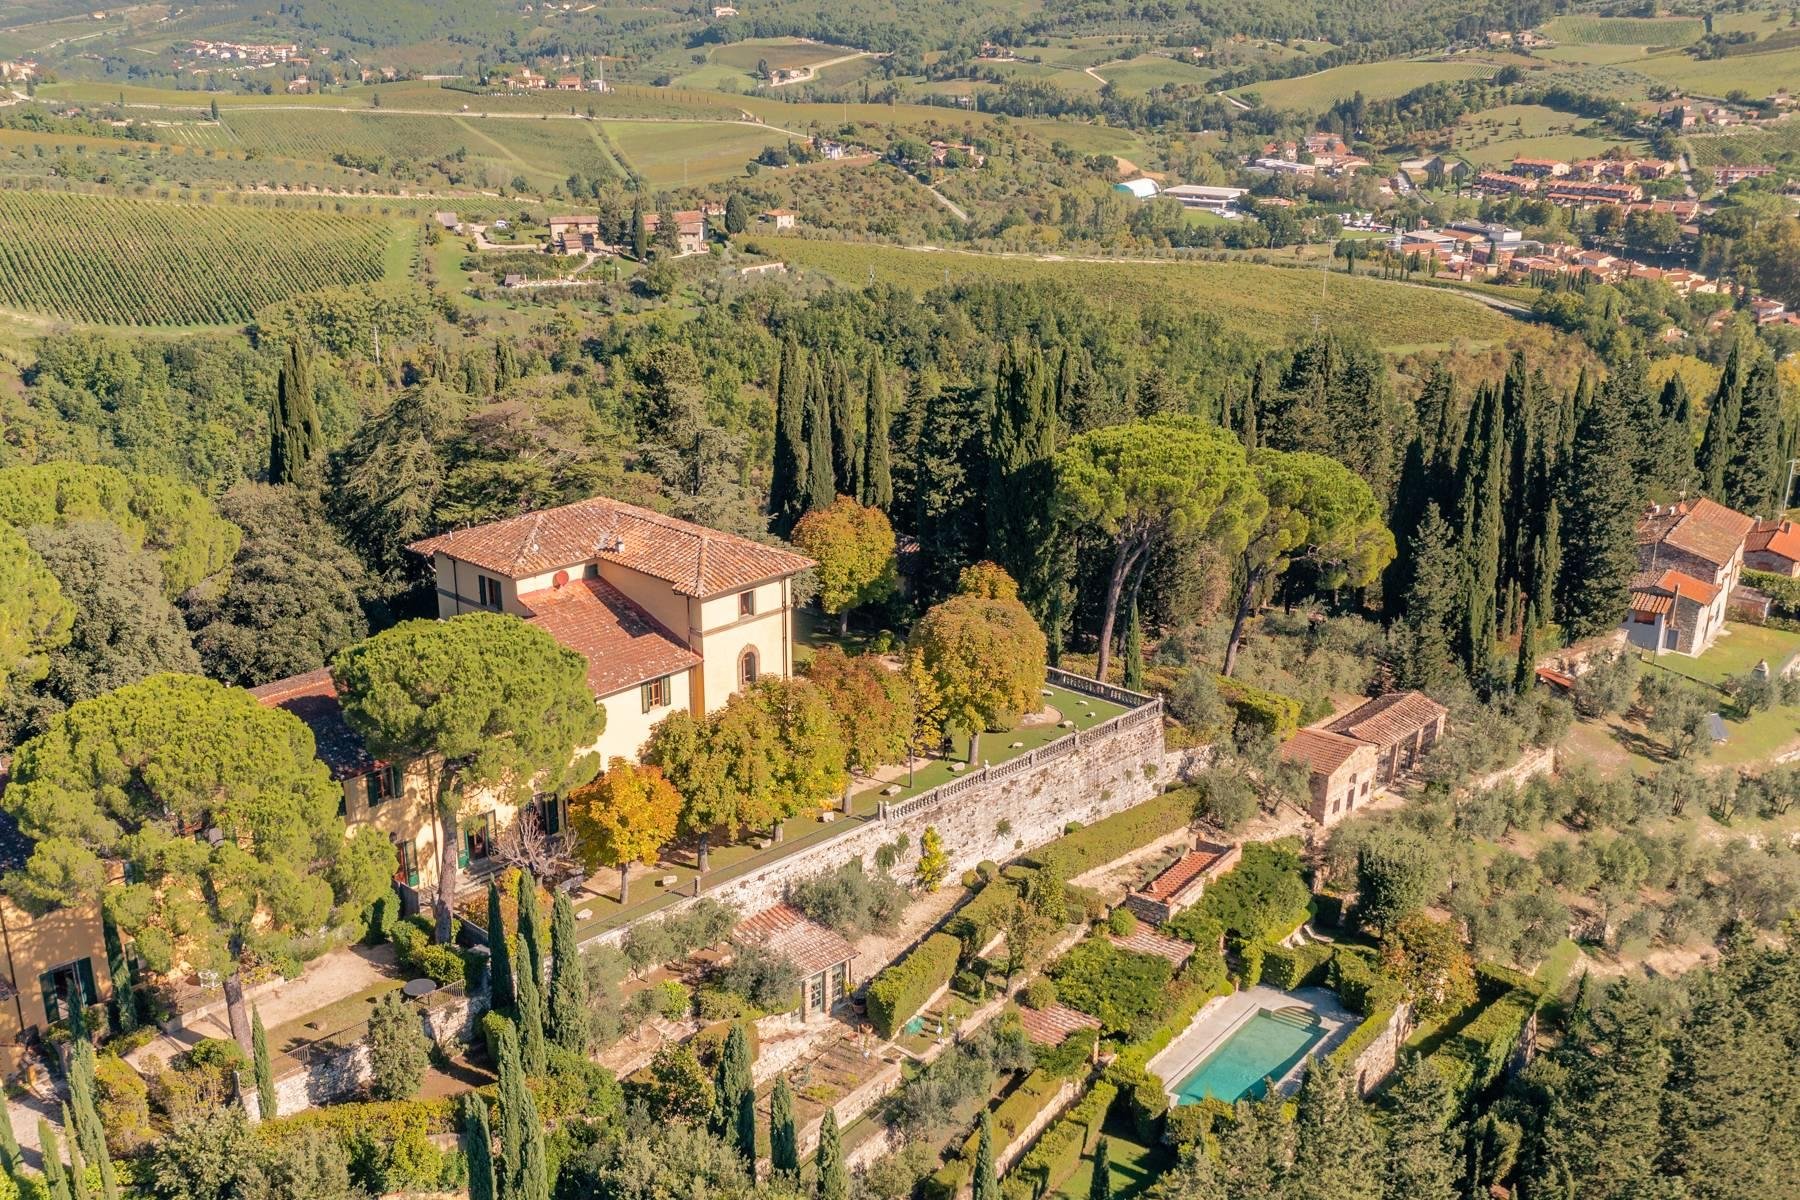 Francis York luxurious-tuscan-villa-for-sale-in-the-heart-of-chianti-italy-7.jpg